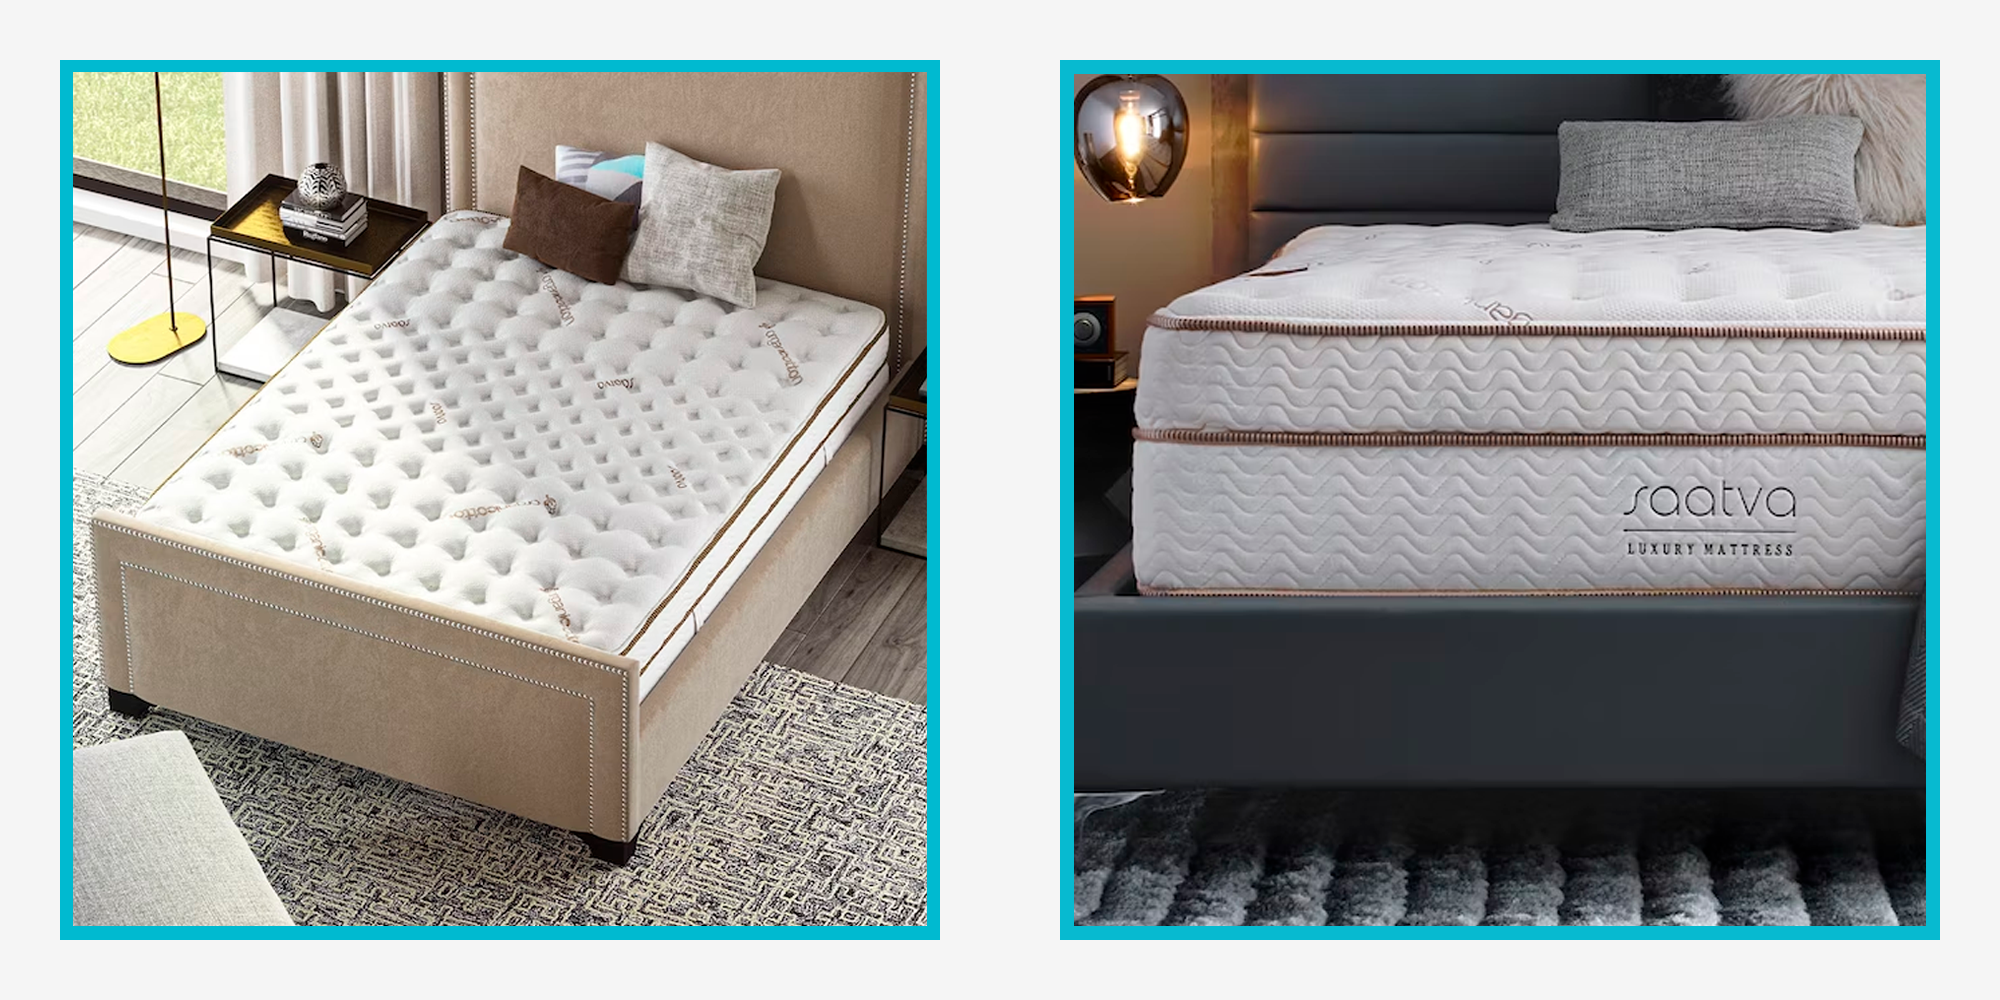 Save Up to $300 on One of Our Favorite Mattresses Ever